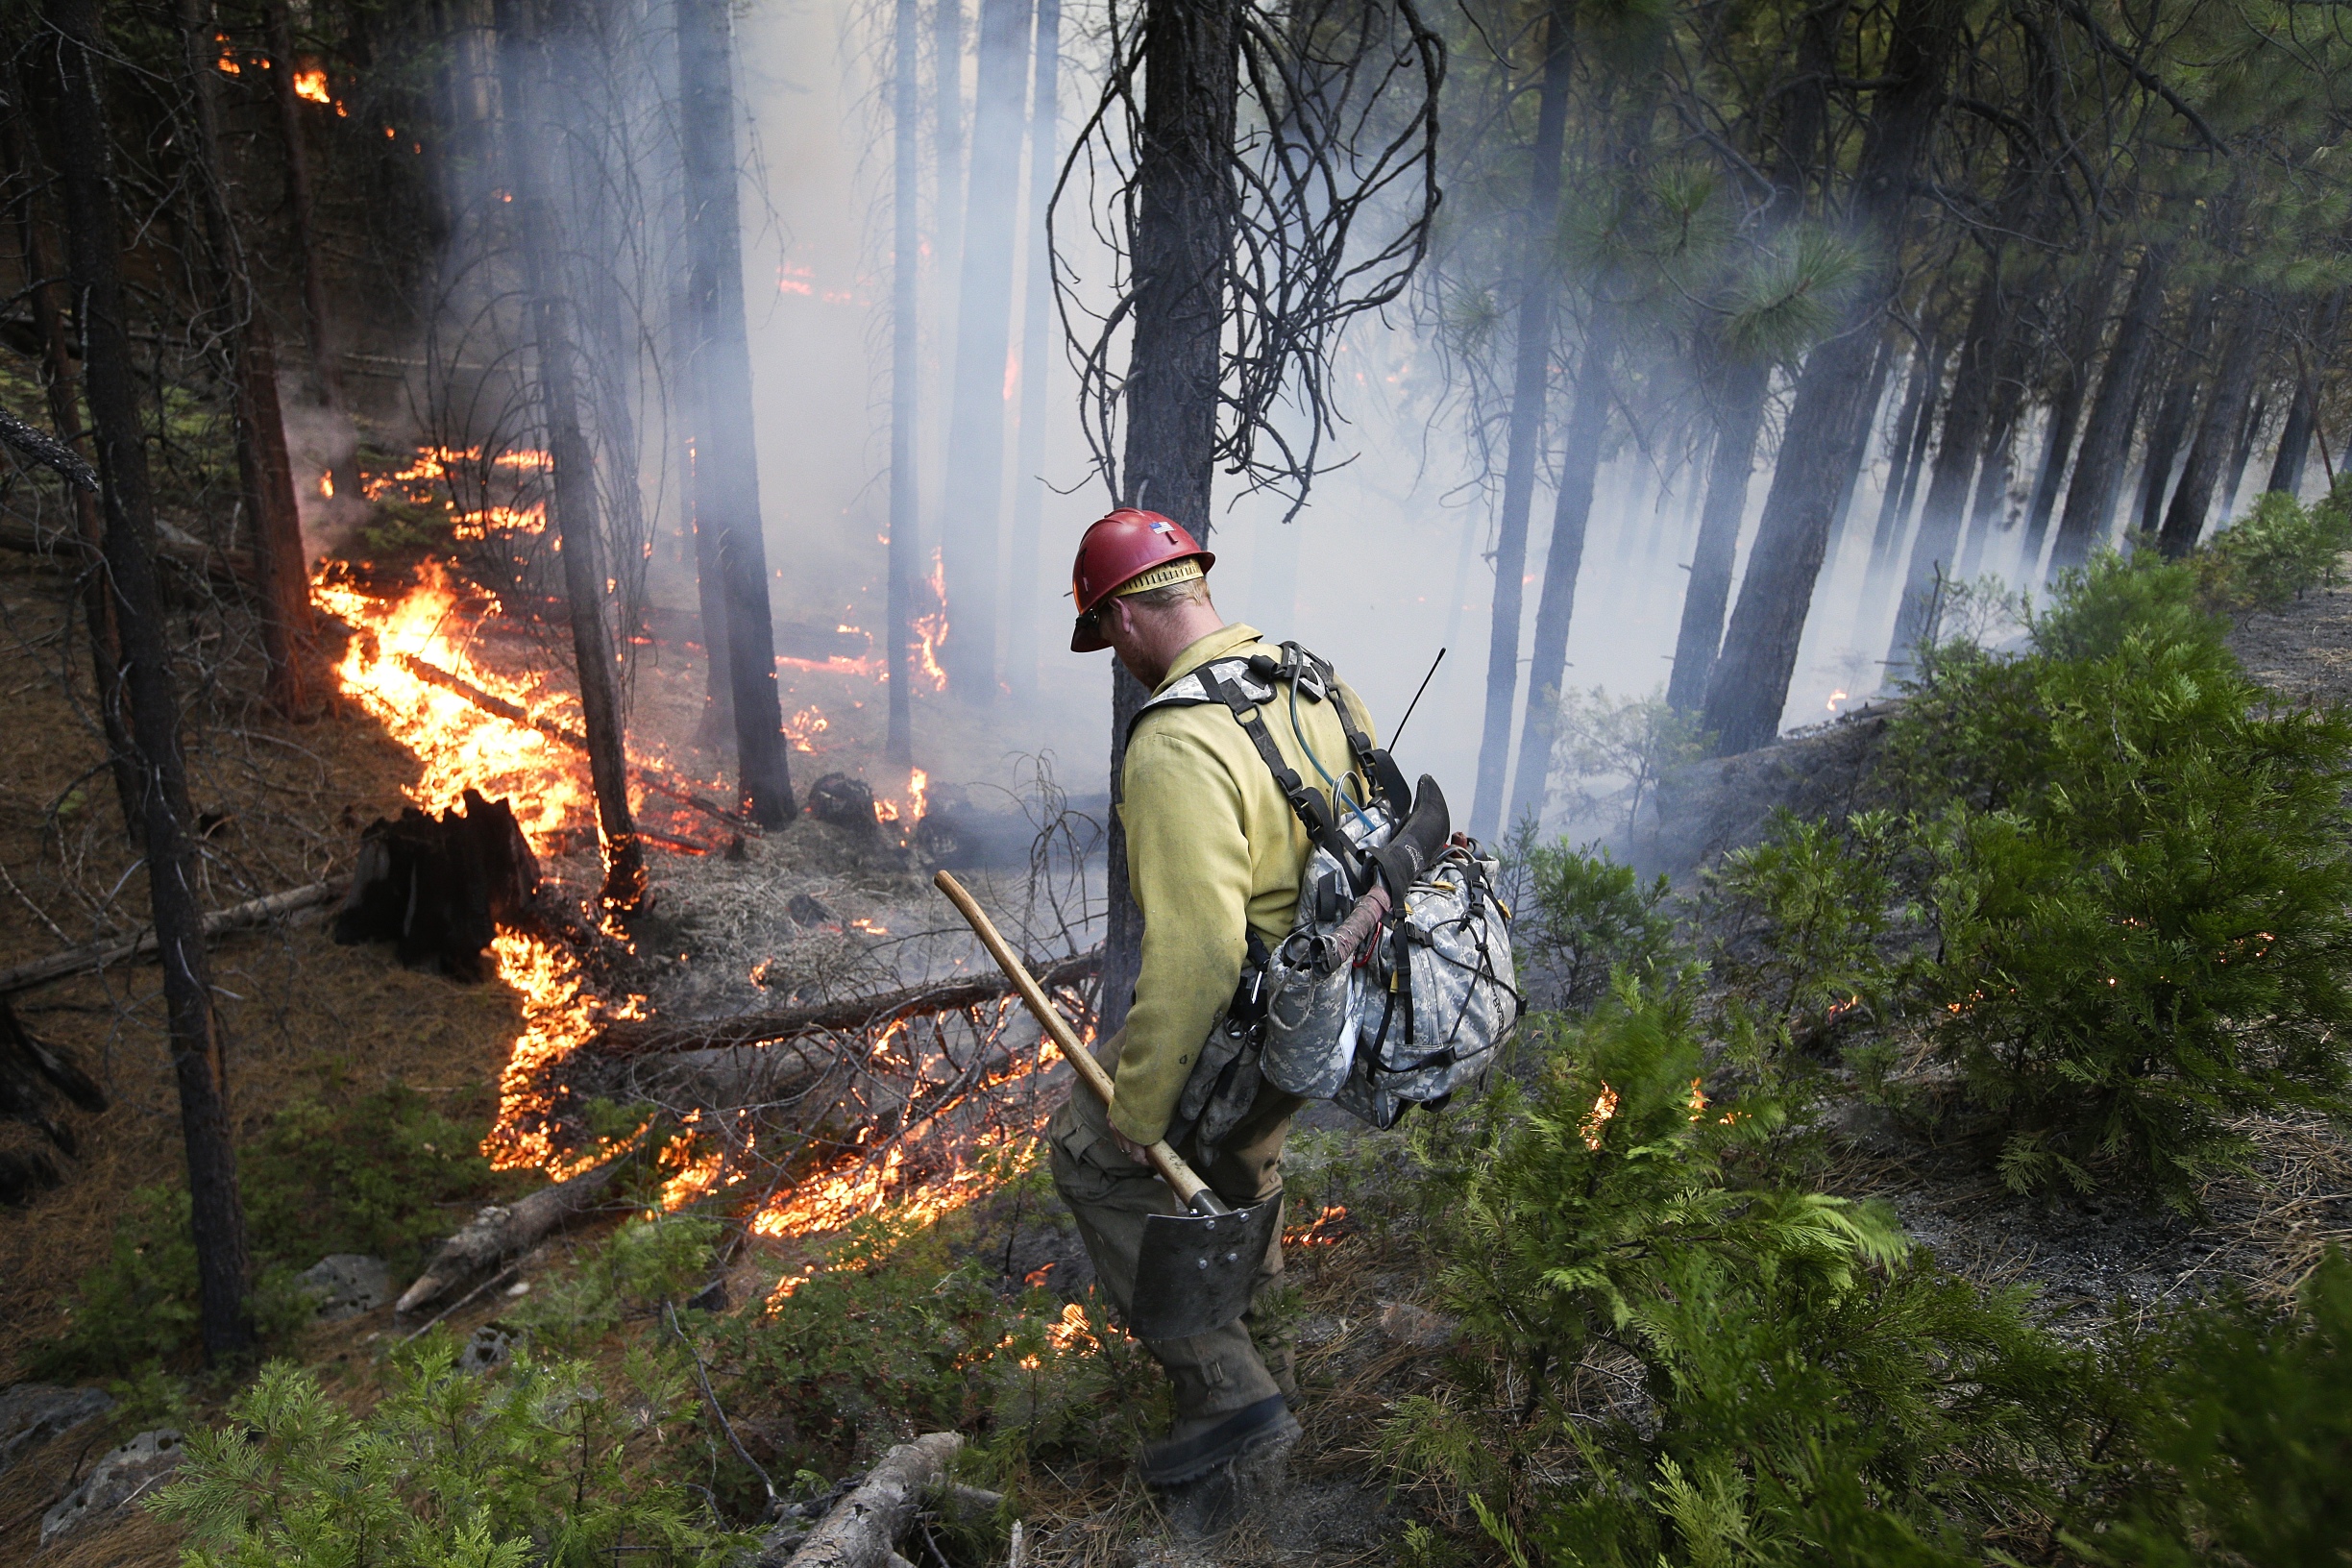 Firefighter Russell Mitchell monitors a back burn during the Rim Fire near Yosemite National Park, California, on Tuesday. Photo: AP